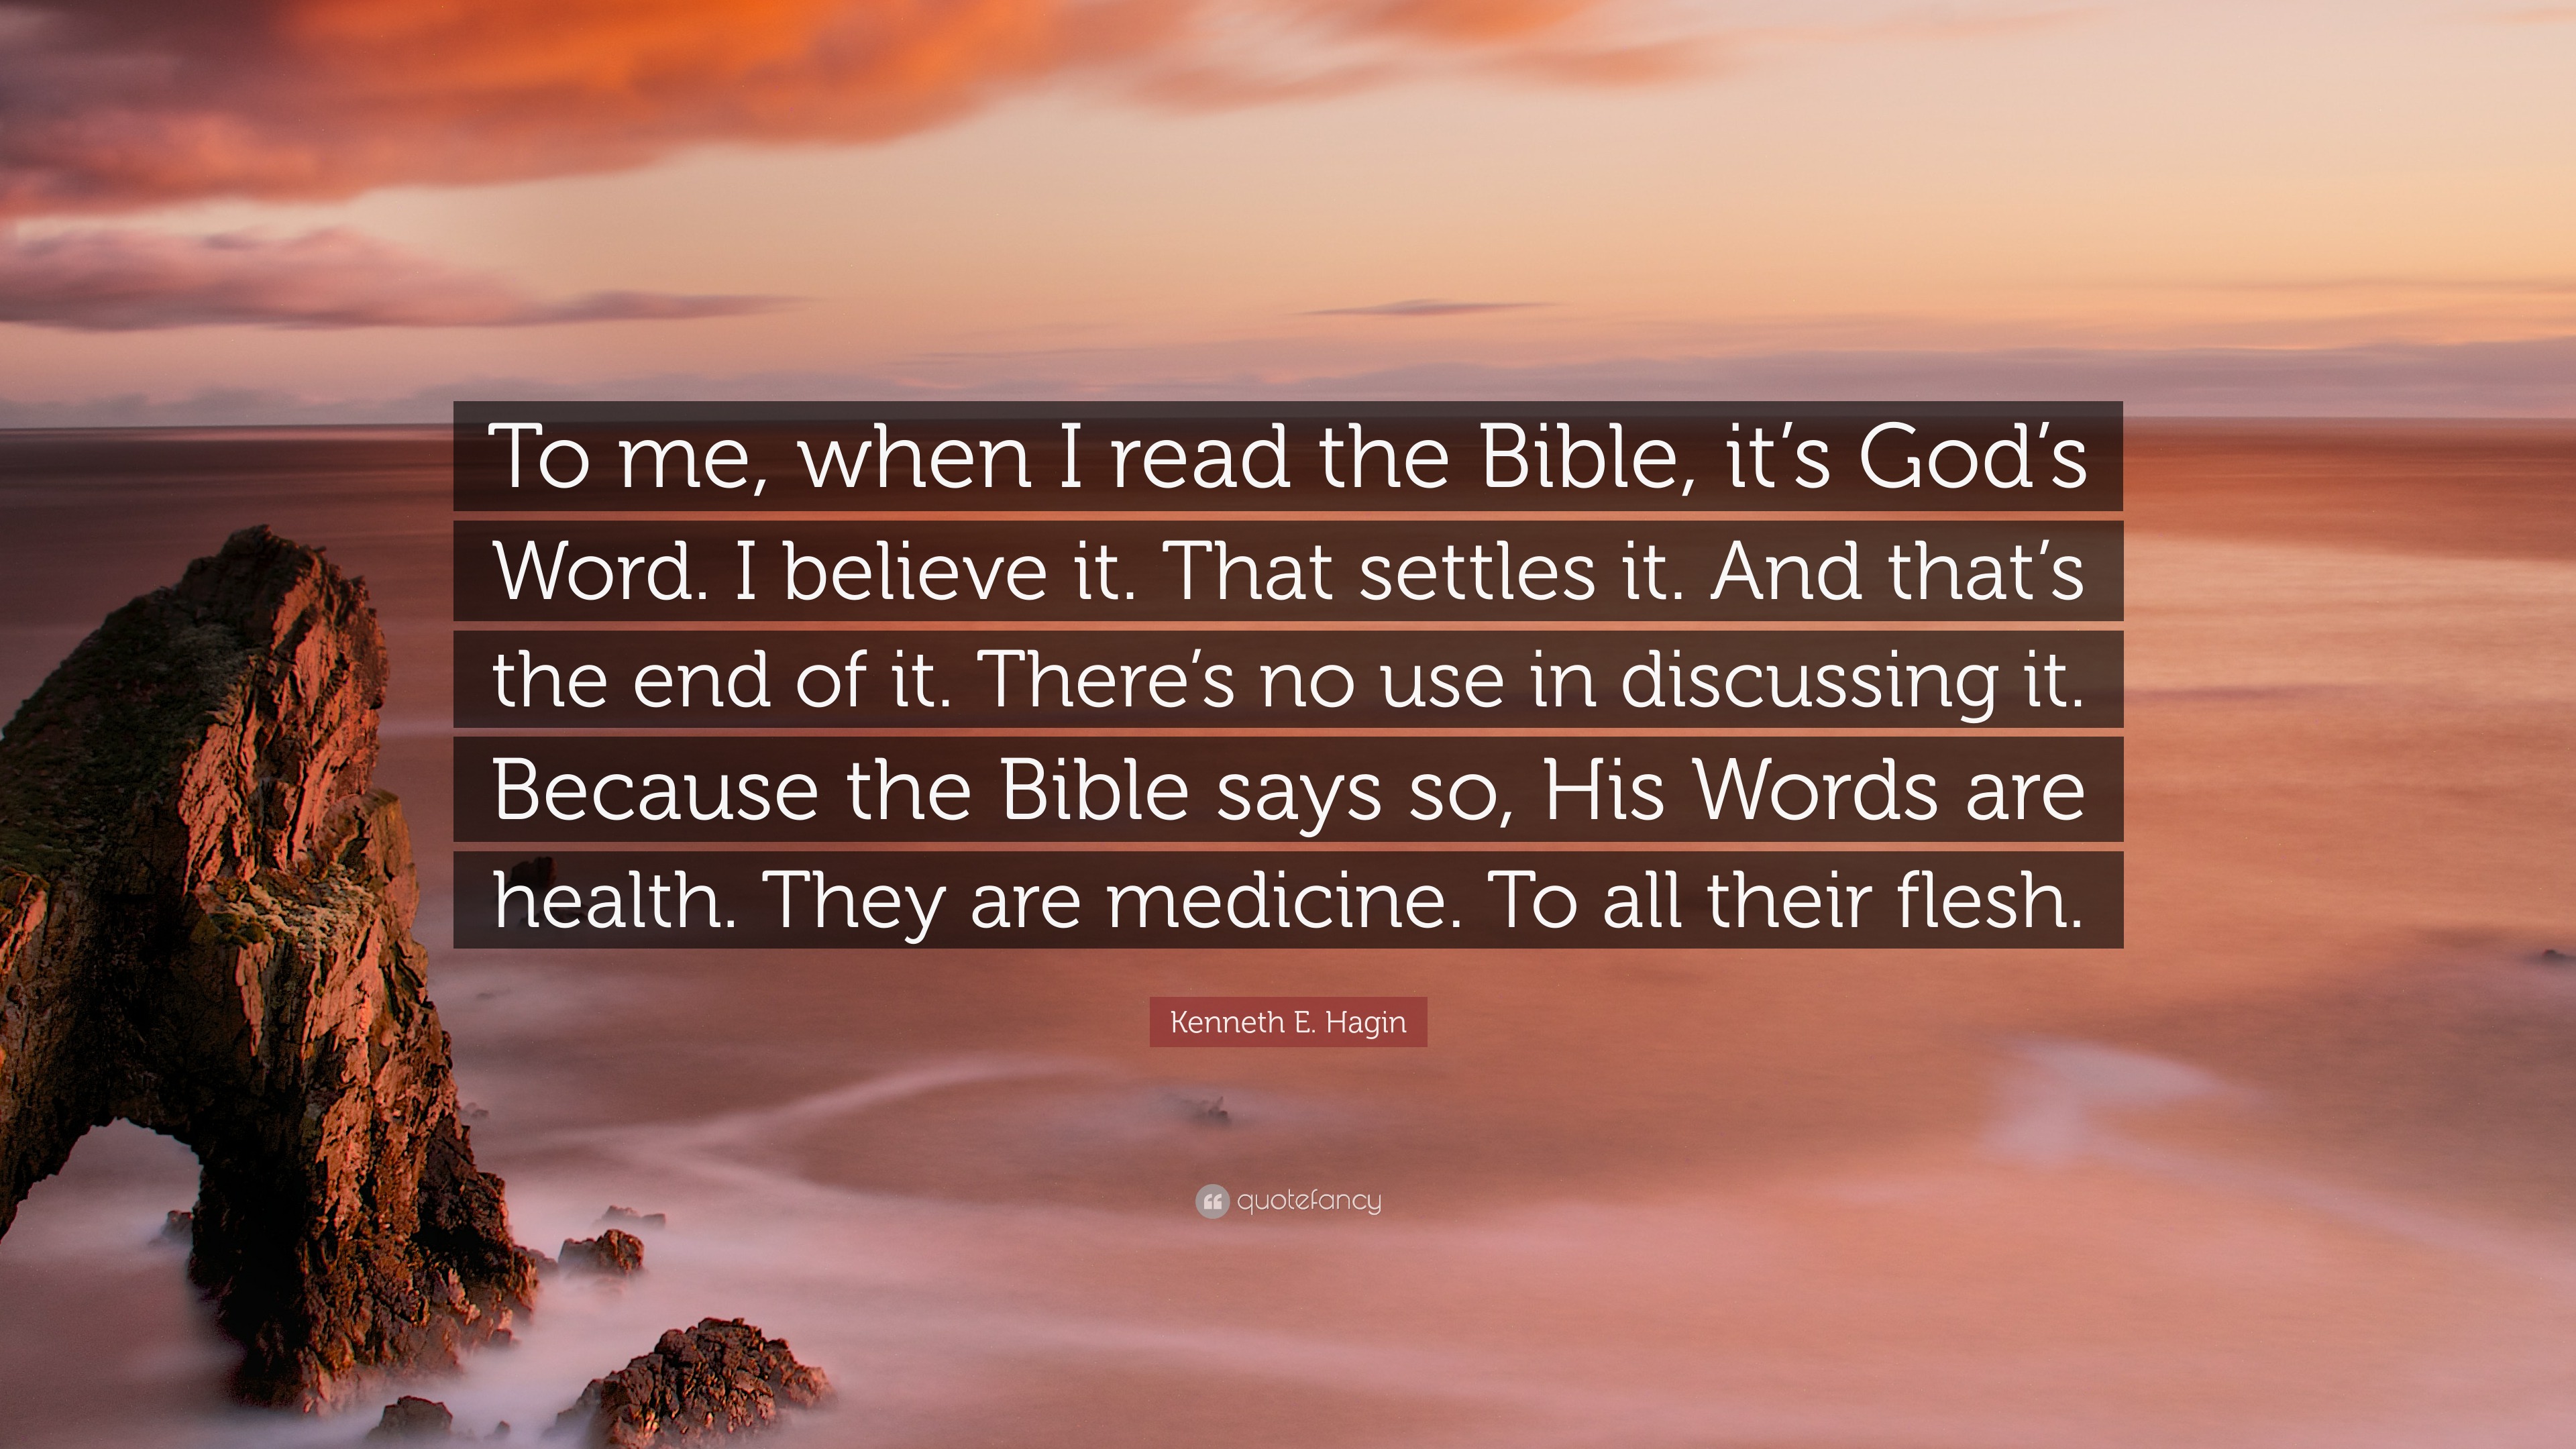 Kenneth E. Hagin Quote: “To me, when I read the Bible, it’s God’s Word ...